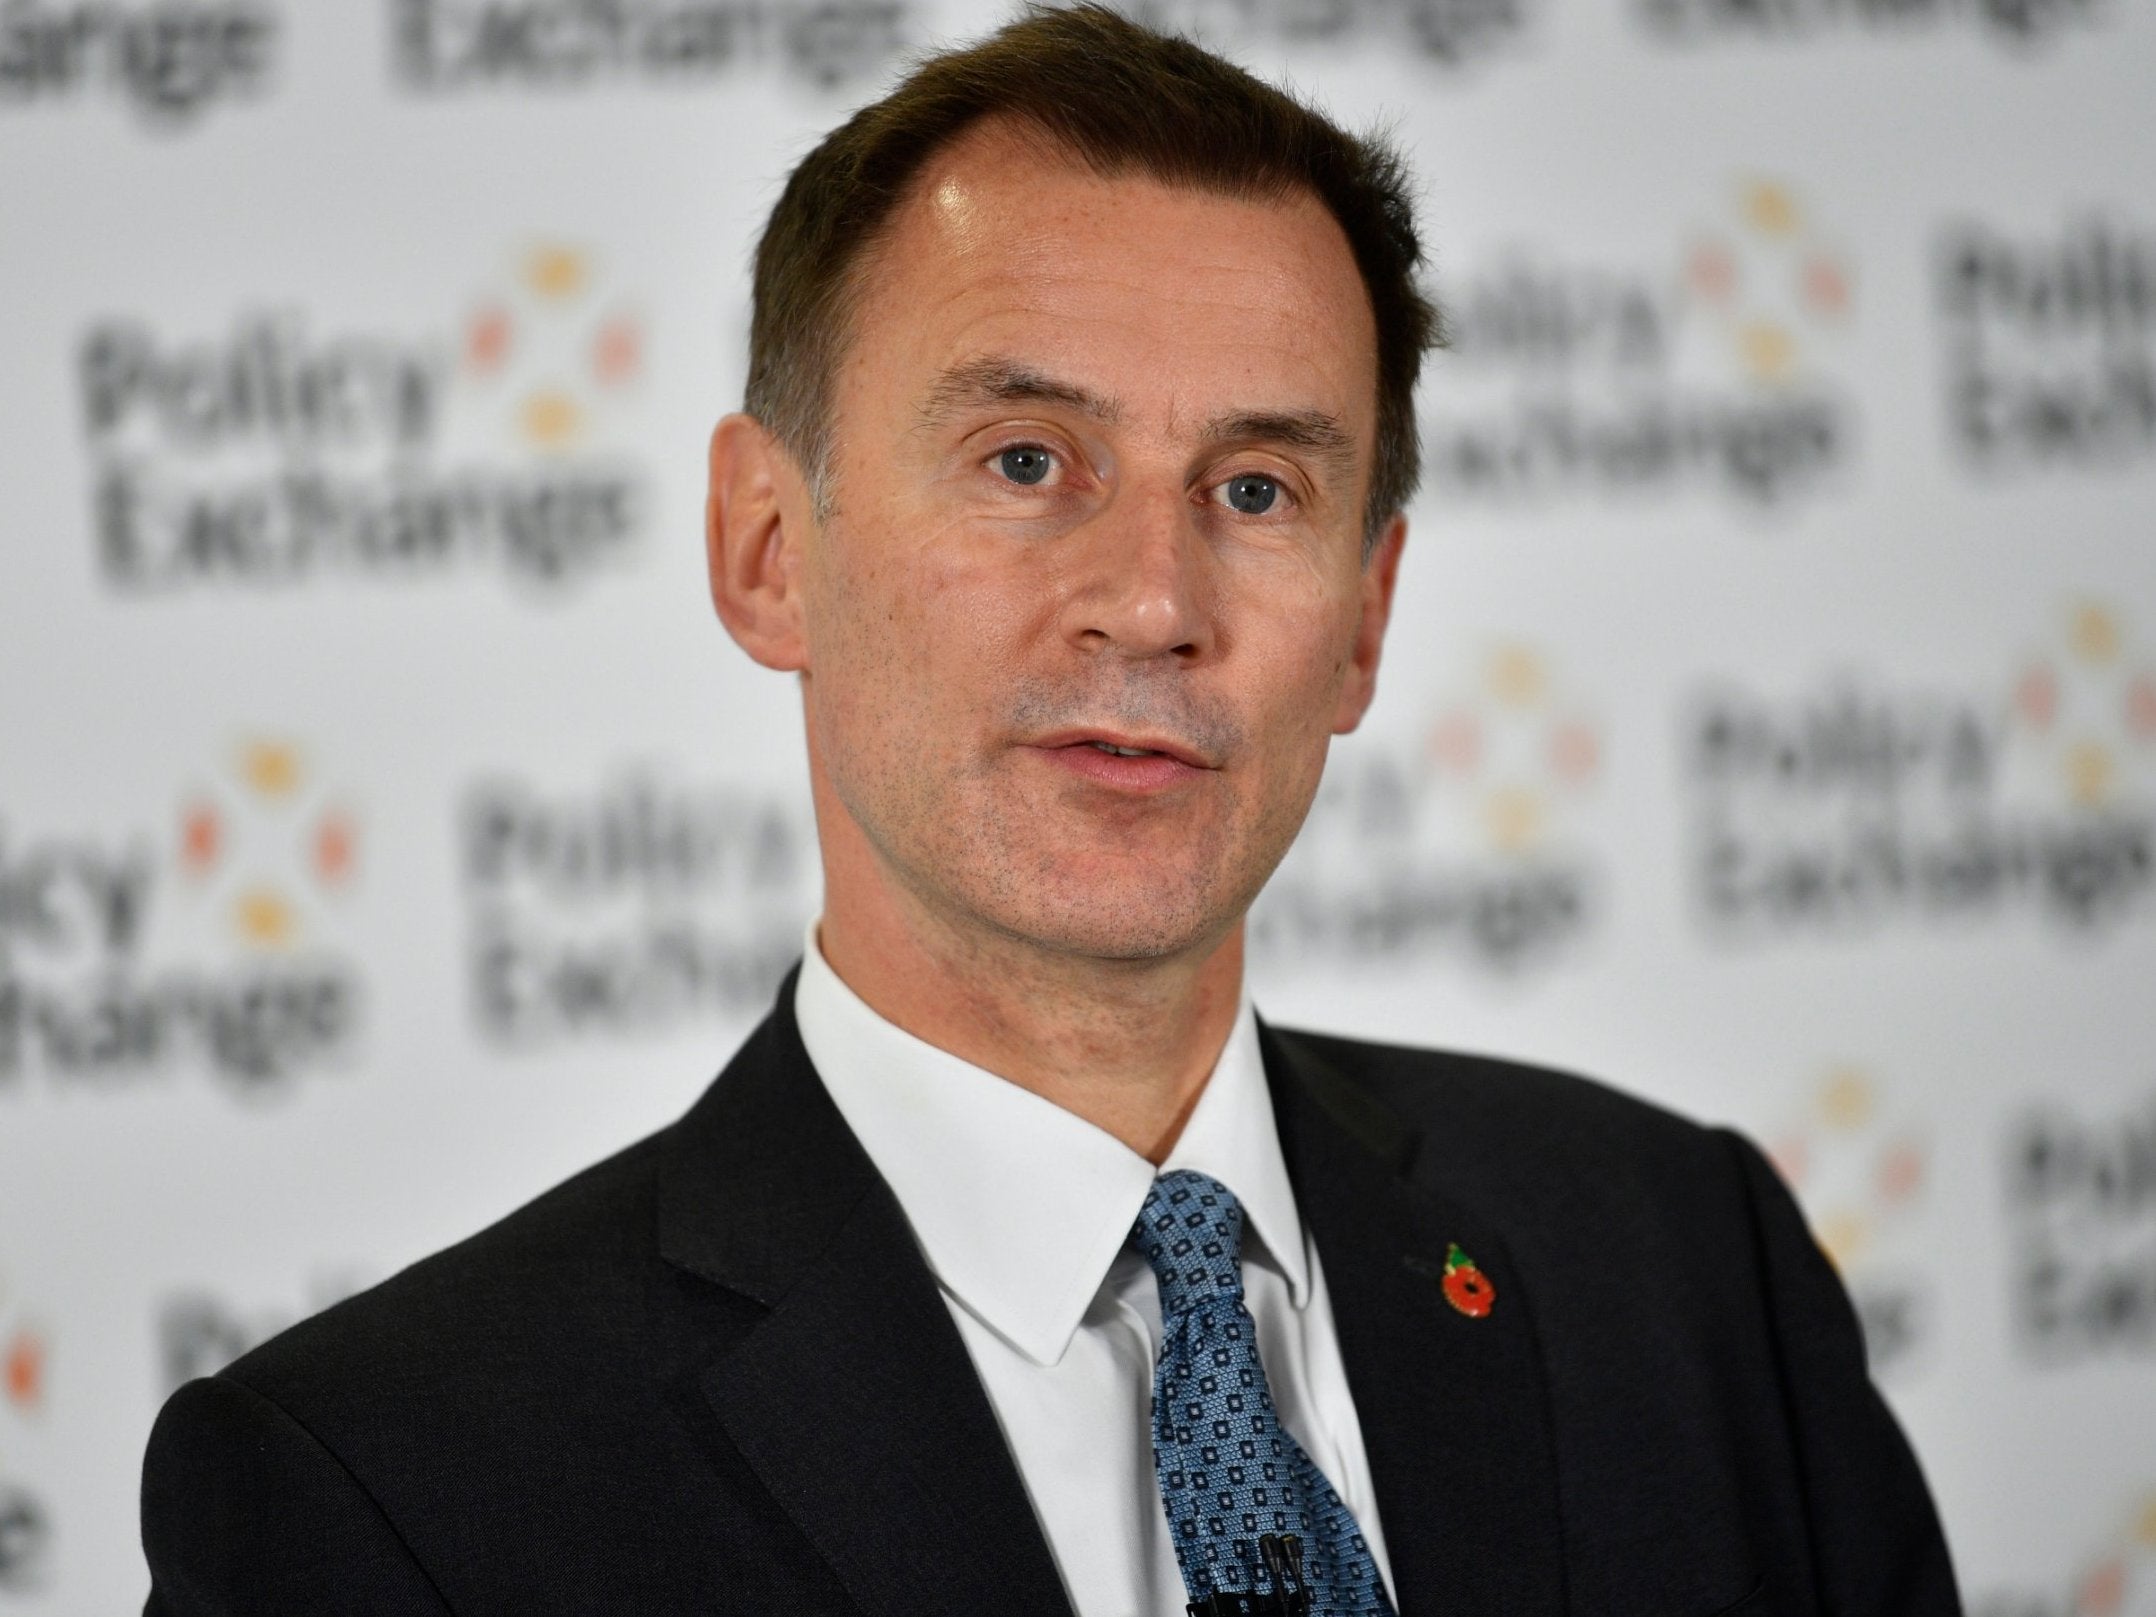 Foreign Secretary Jeremy Hunt's said there would be a 'proper recruitment process'.